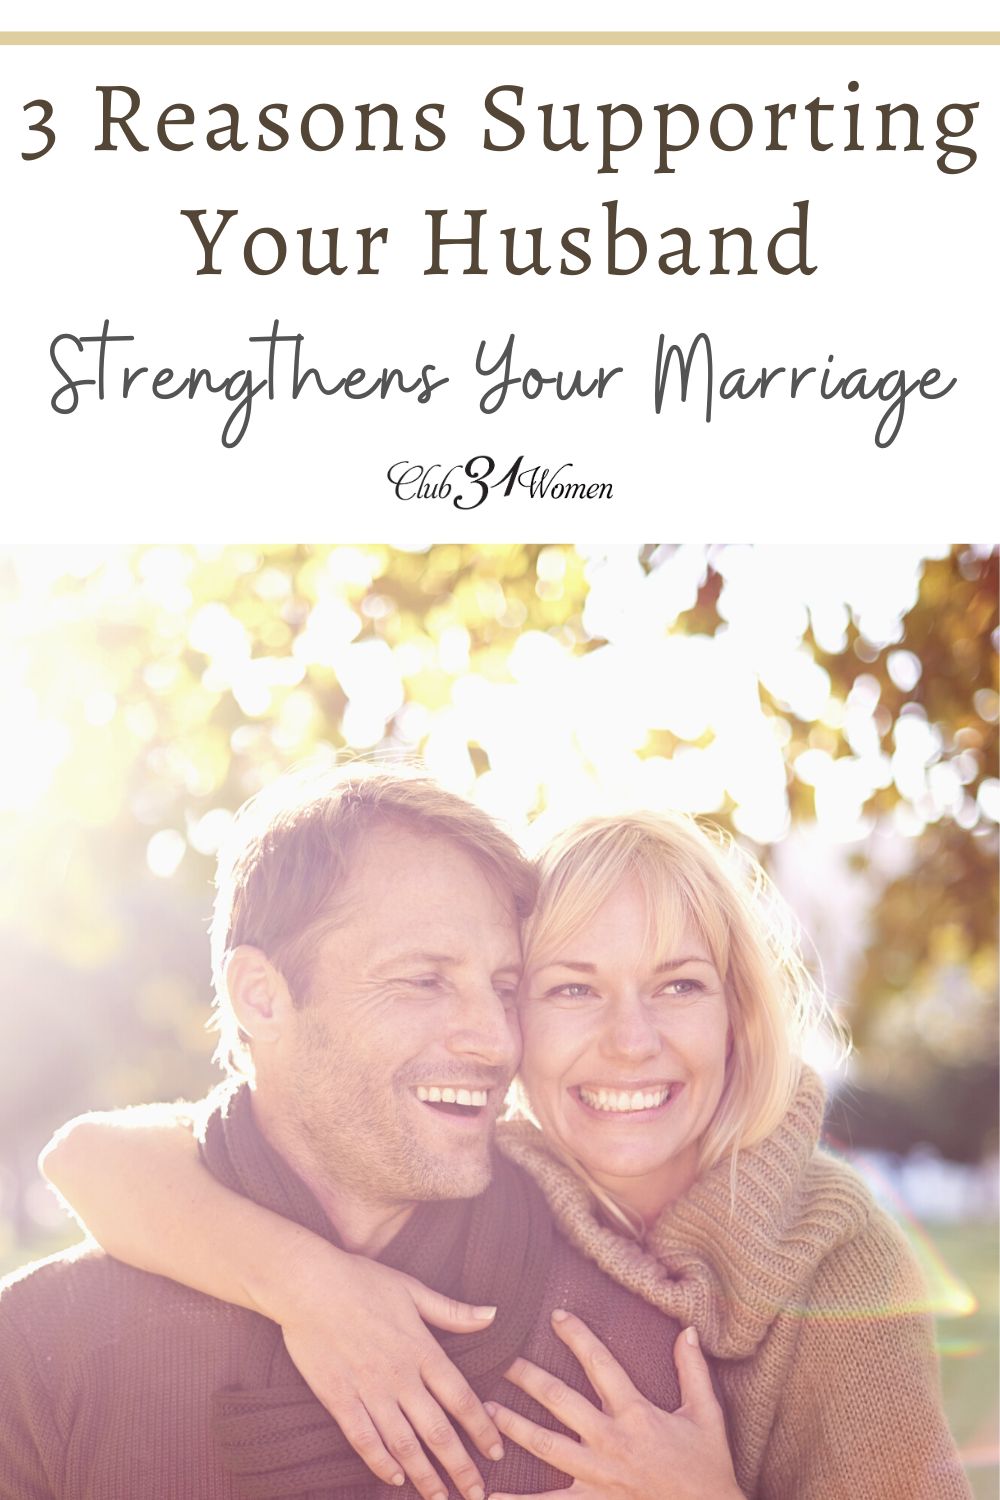 Supporting your husband will be easy at times and much more difficult at other times. You can strengthen your marriage by being supportive. via @Club31Women